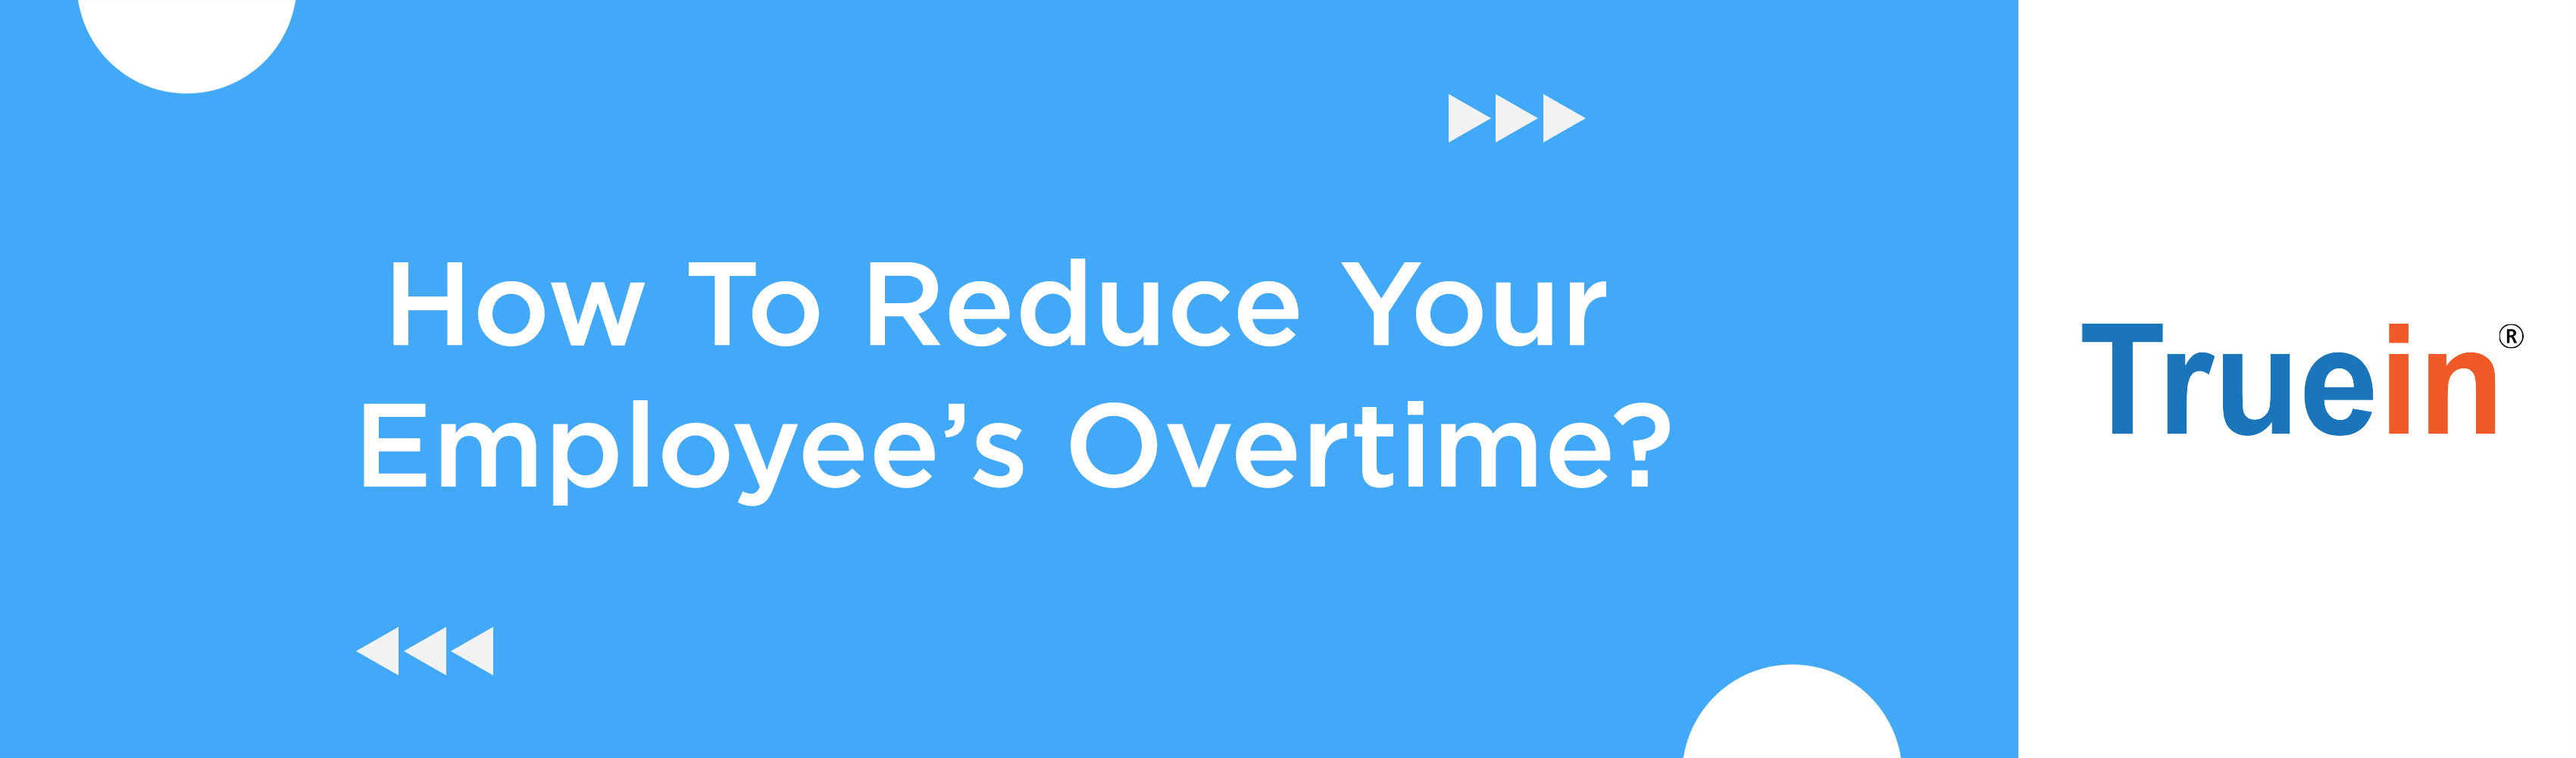 How To Reduce Your Employee’s Overtime?